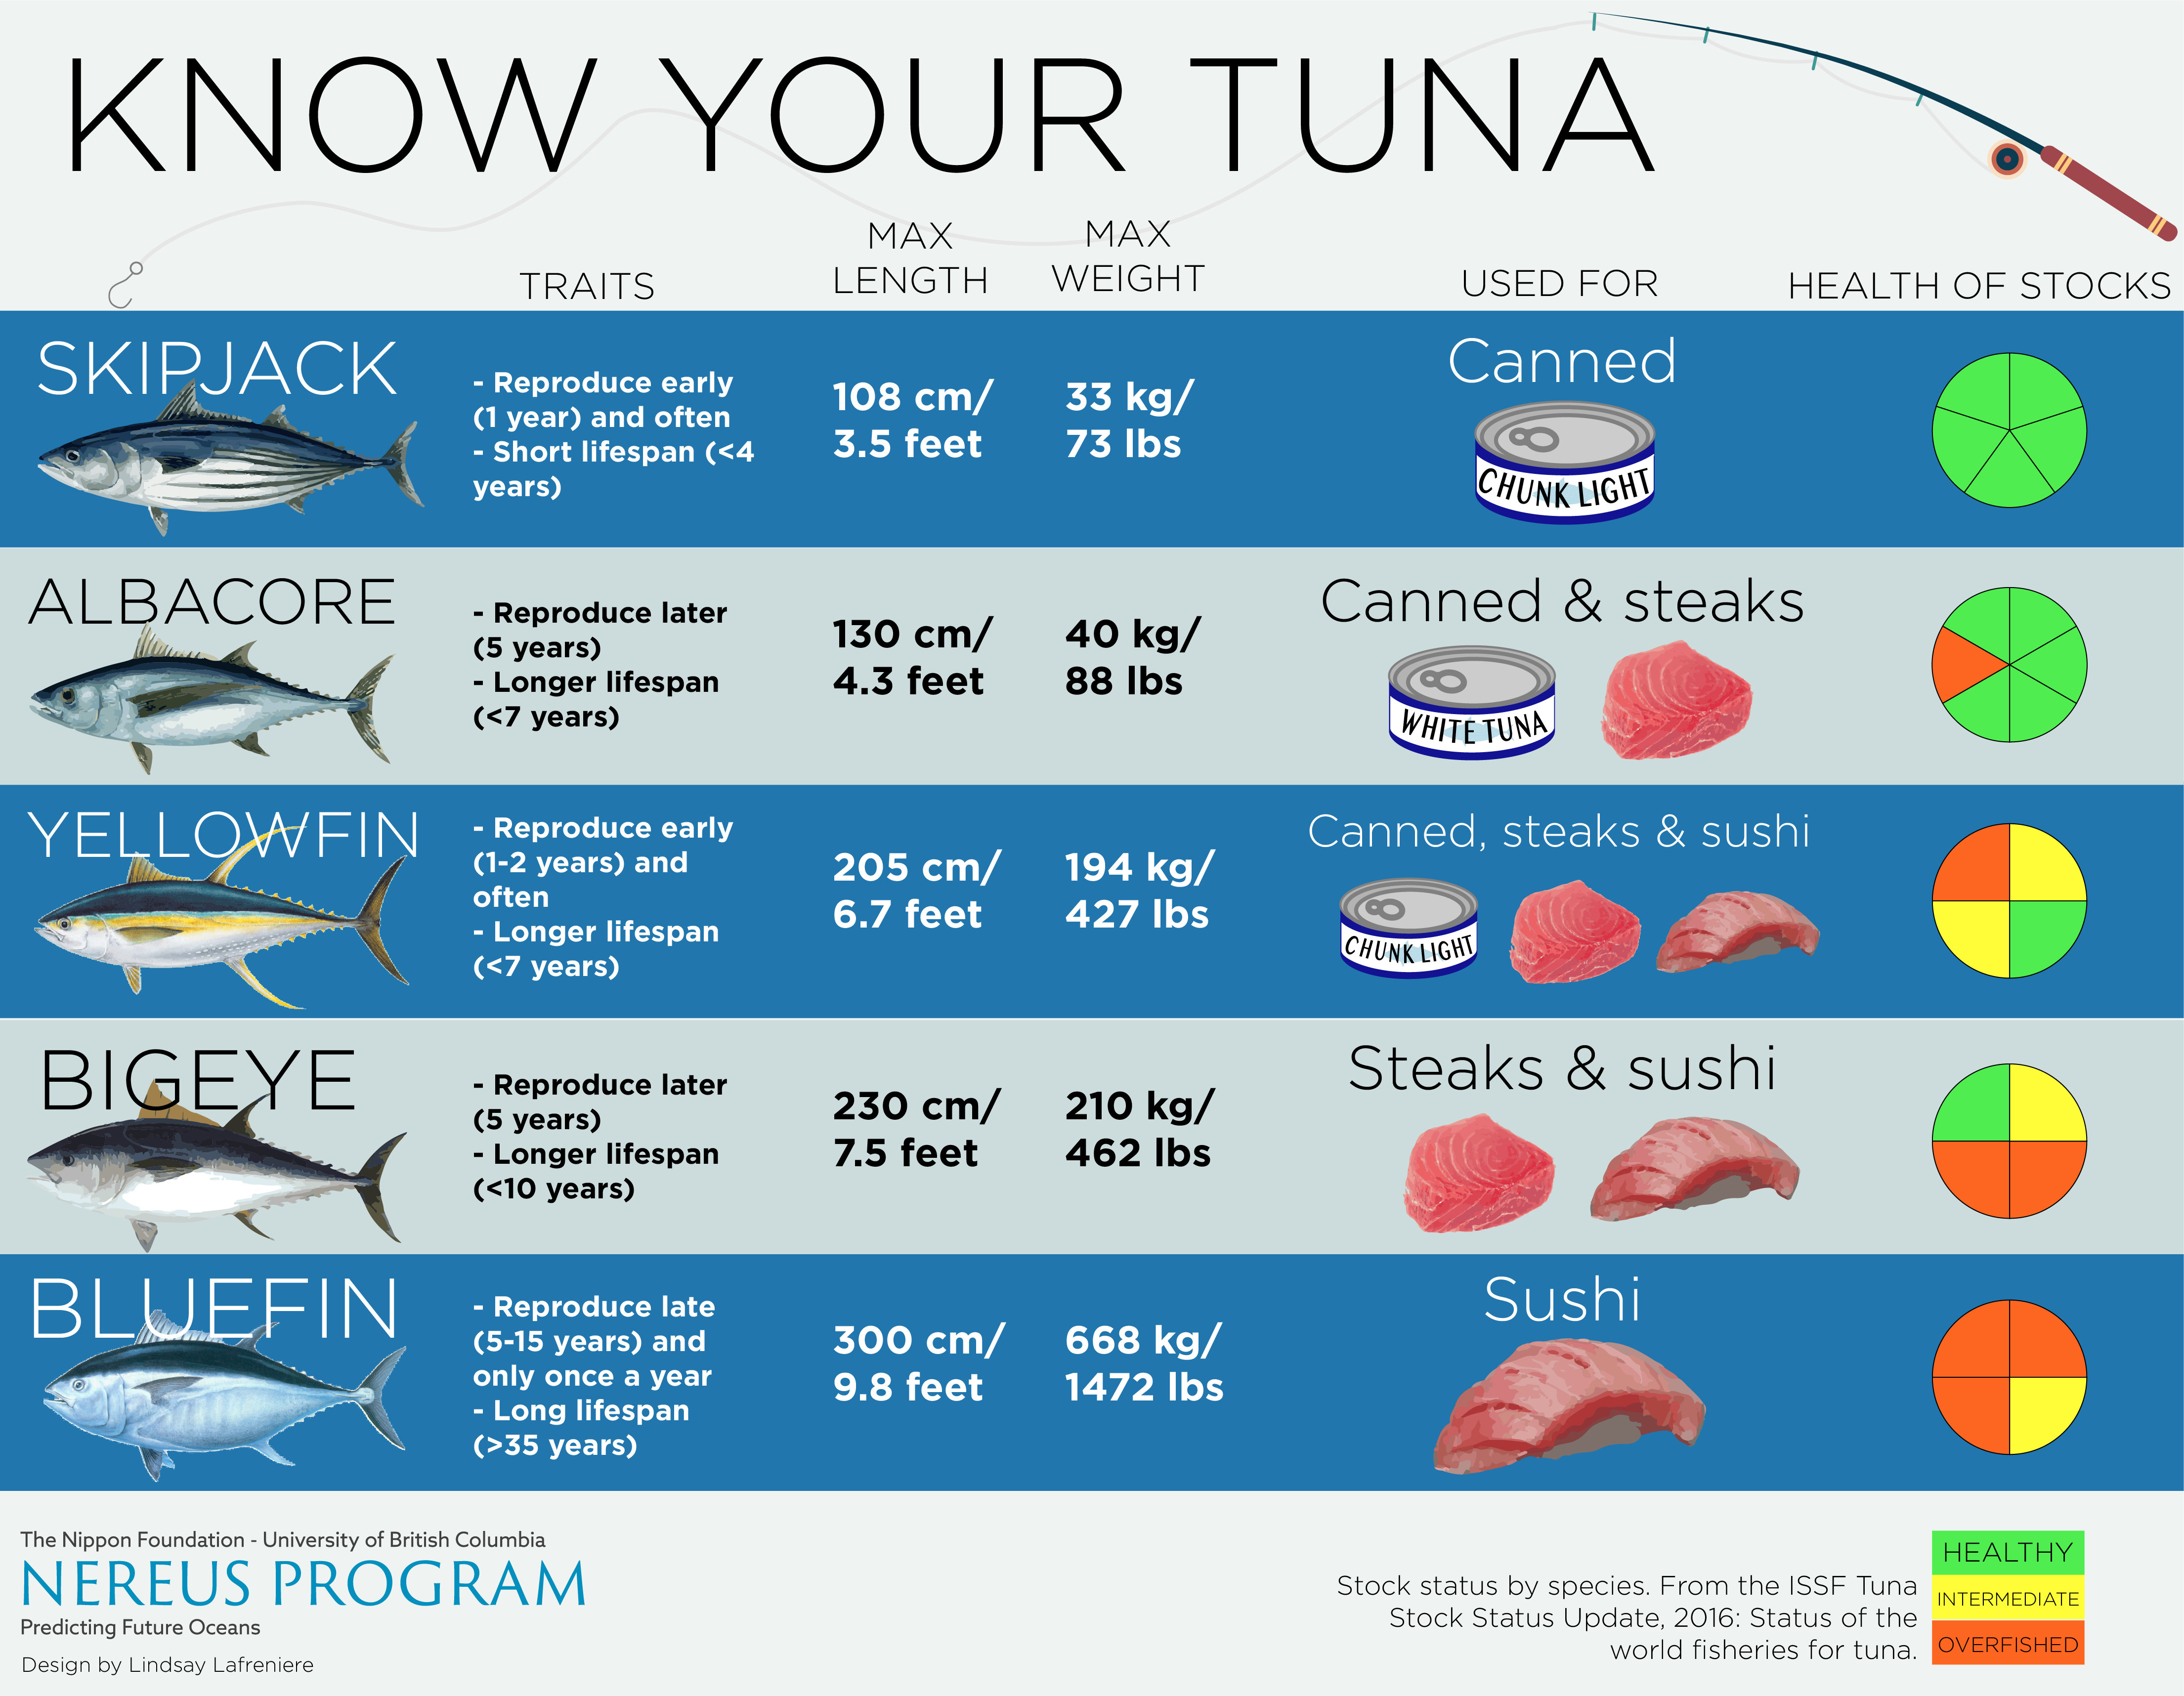 eat tuna, it’s important to look at both the health of the fish stocks and ...